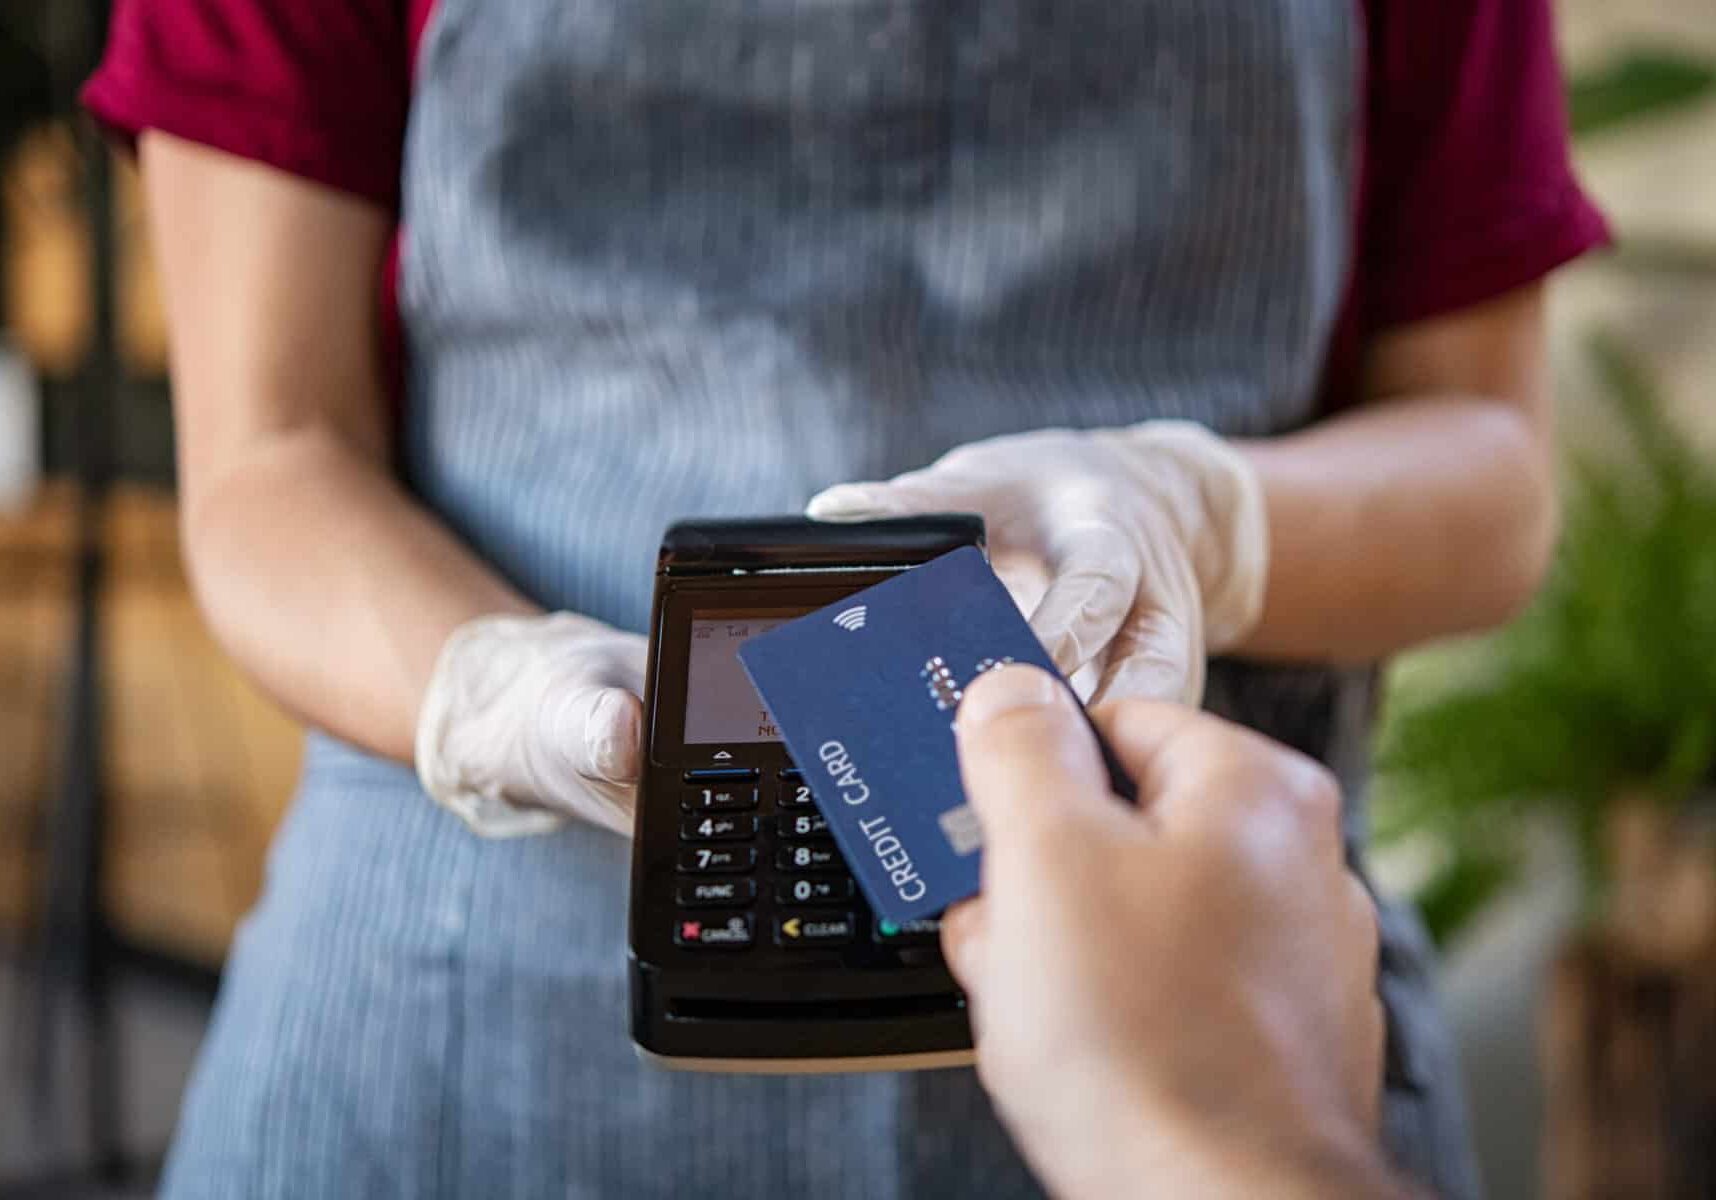 Waitress holding credit card reader machine and wearing protective disposable gloves at bar counter with client holding credit card. Man paying bill with credit card. Hand of customer paying with contactless credit card with NFC technology.